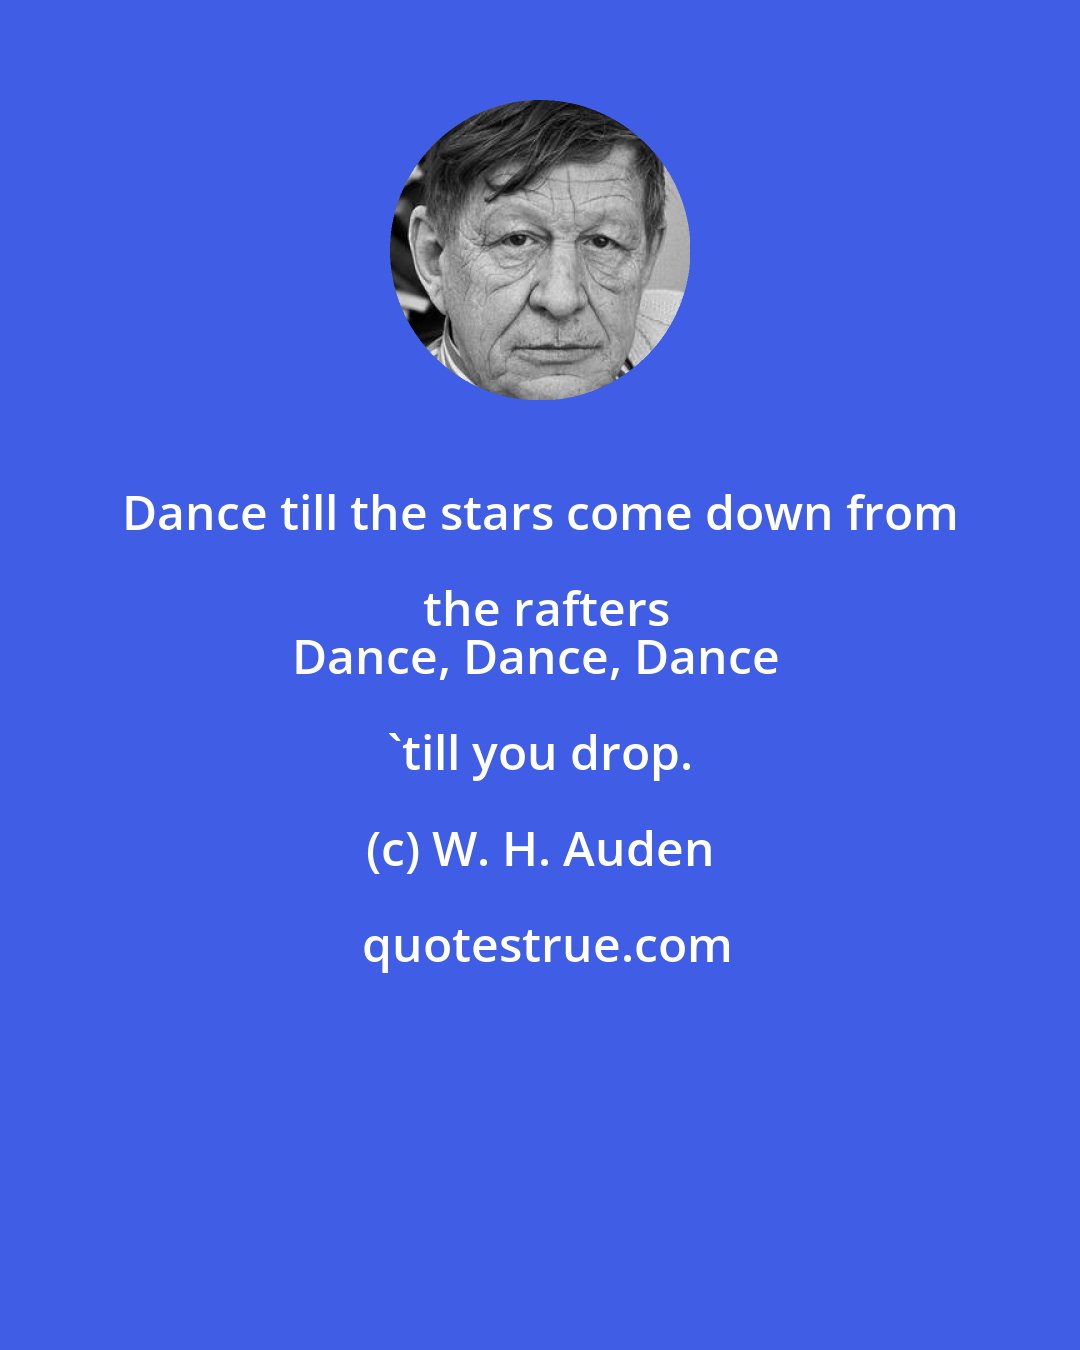 W. H. Auden: Dance till the stars come down from the rafters
Dance, Dance, Dance 'till you drop.